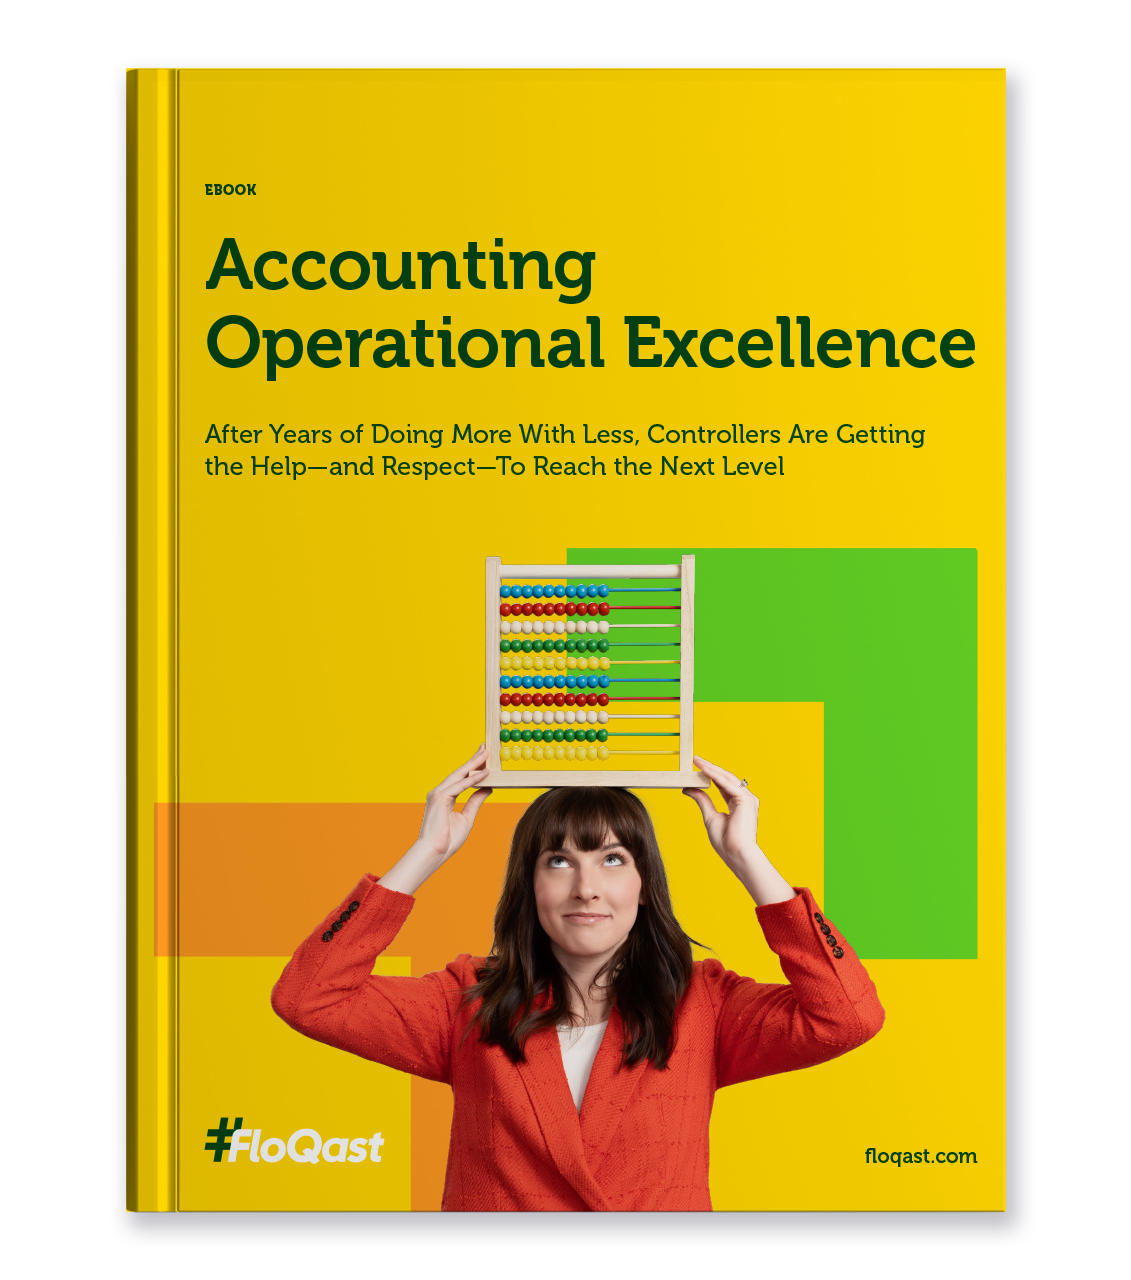 Accounting Operational Excellence Image_1131x1280